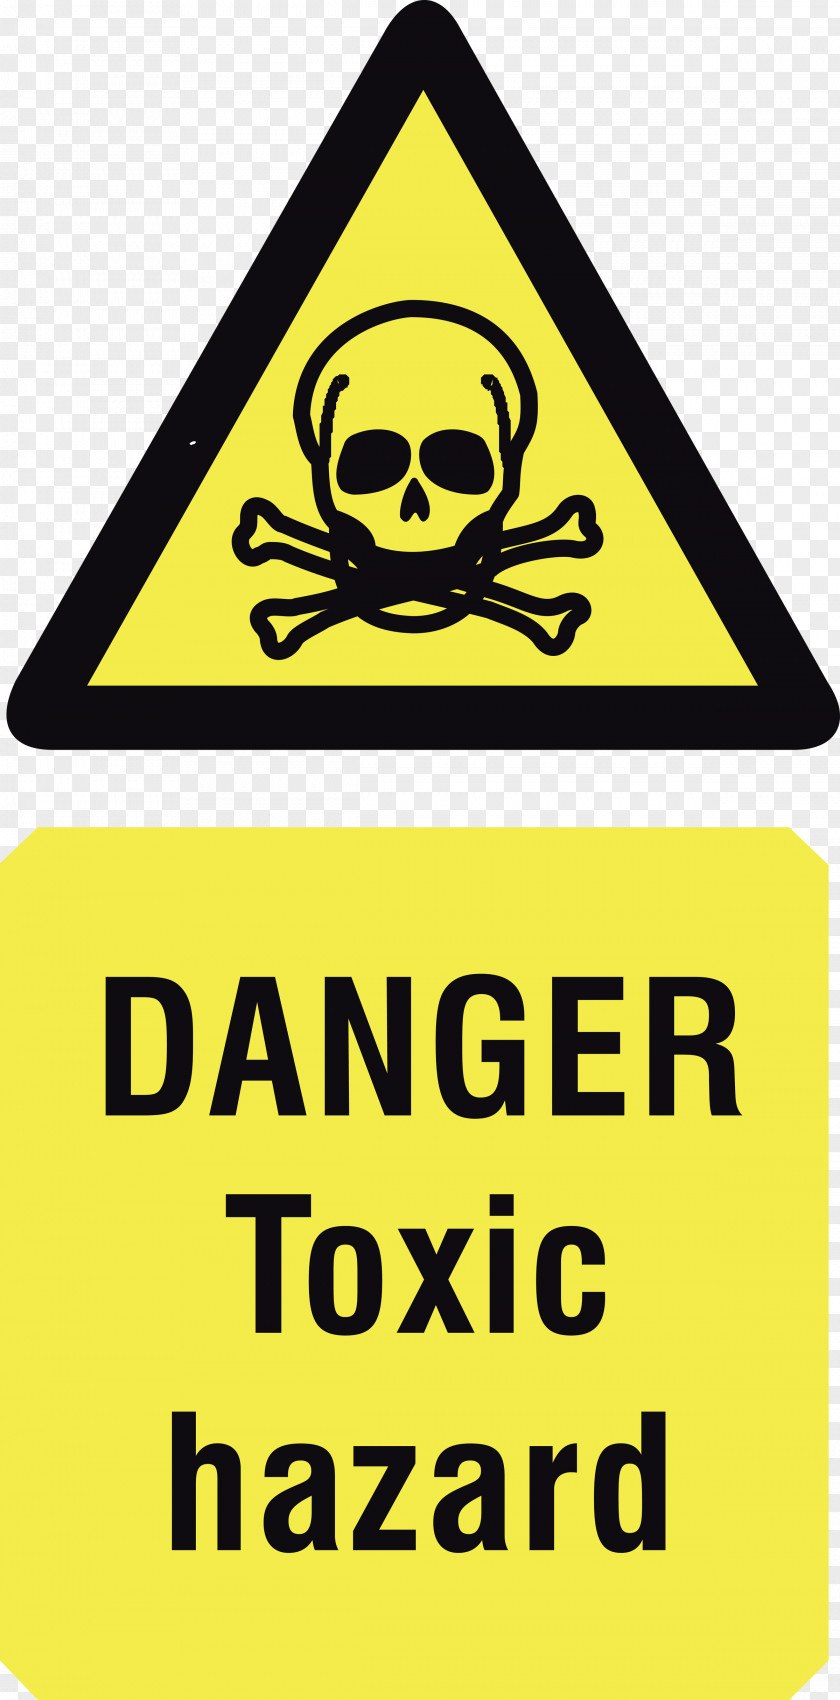 Toxic Chemicals Substances Control Act Of 1976 The Occupational Safety And Health Signage PNG